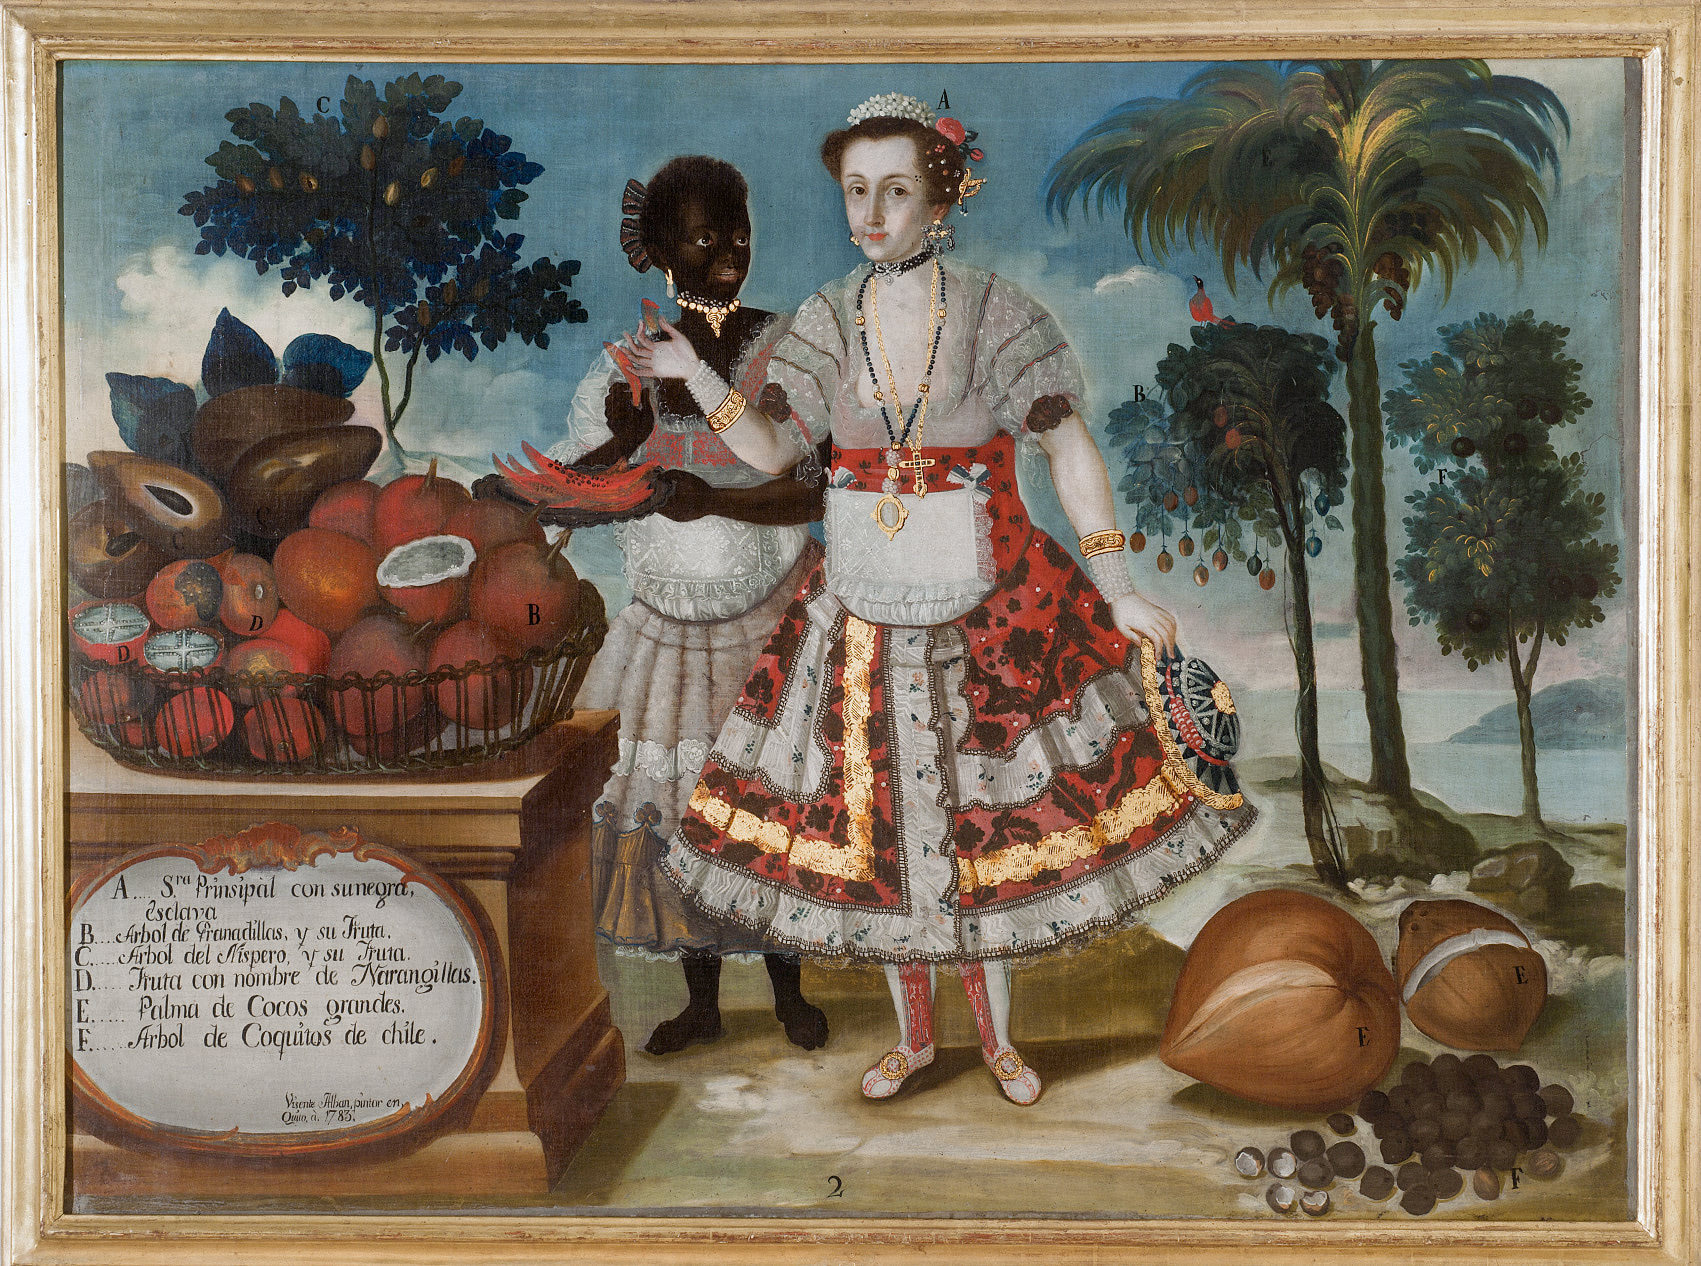 Painting of a woman with her Black slave next to giant tropical fruits.